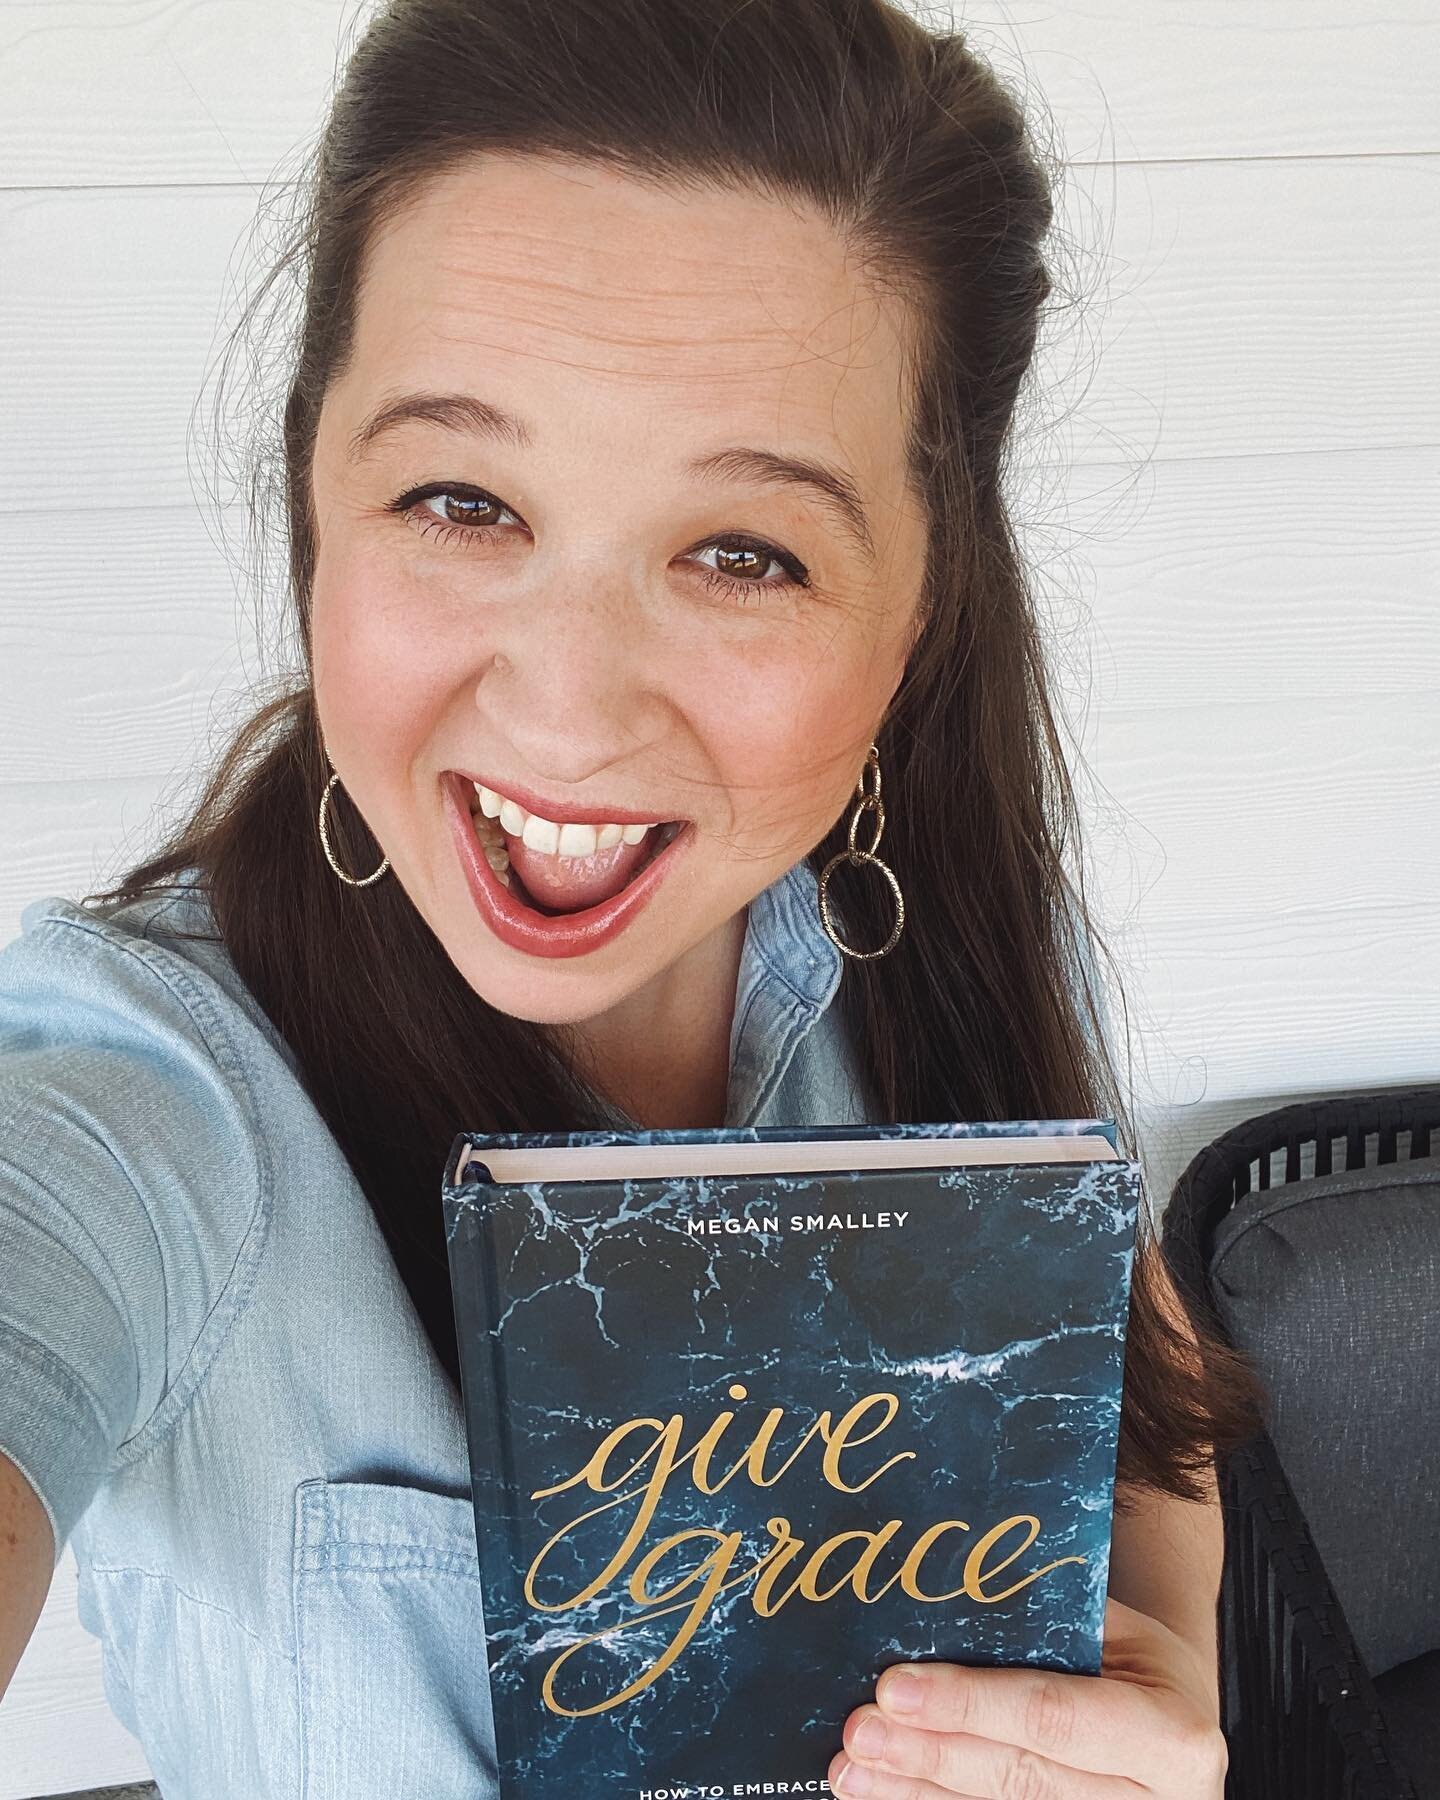 Friend!

This moment is more than two years in the making, and I&rsquo;m SO excited to finally get to share with you my new book Give Grace!

Y&rsquo;all, THIS is the story of God's grace in my life.

You may know me for starting @scarletandgoldshop 